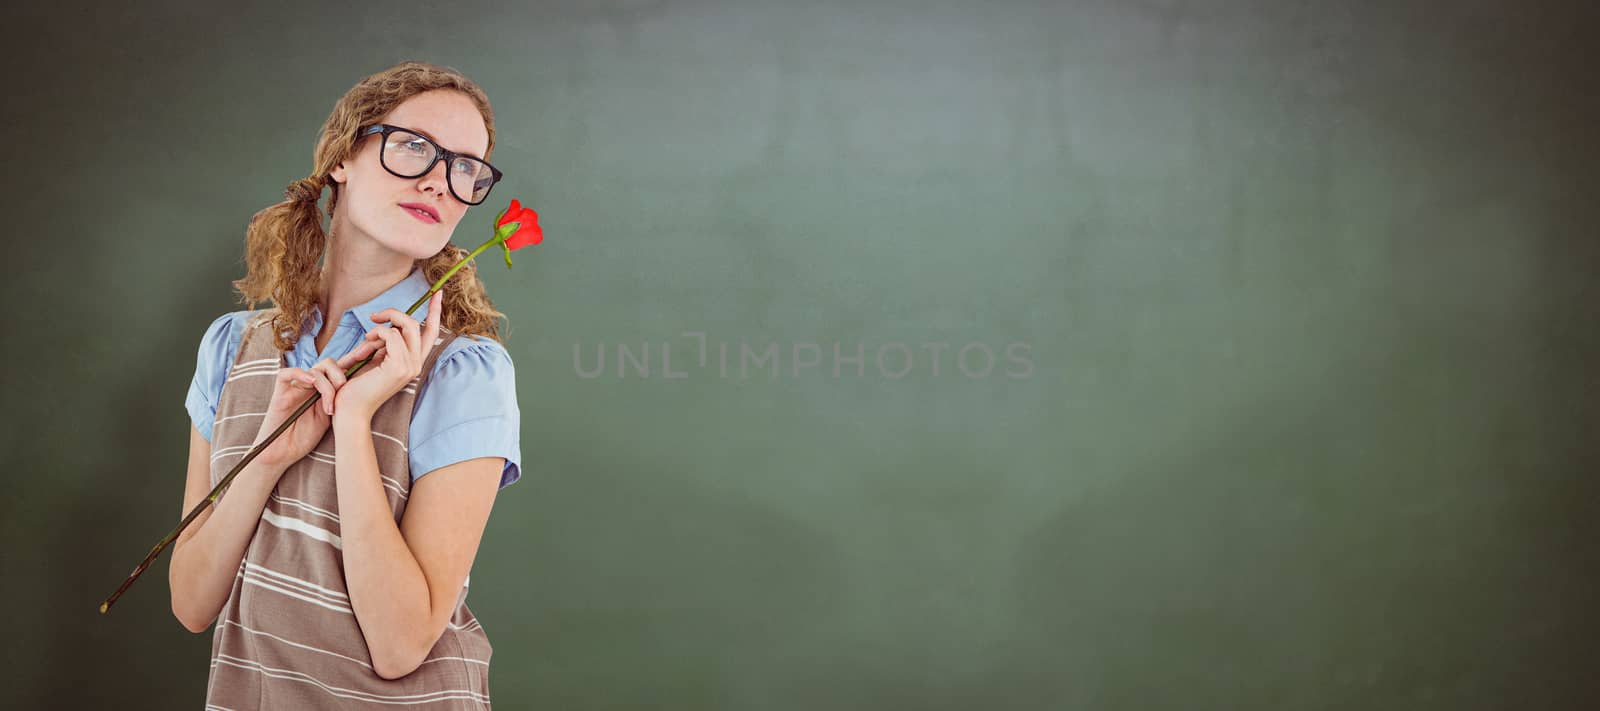 Geeky hipster woman holding rose  against green chalkboard